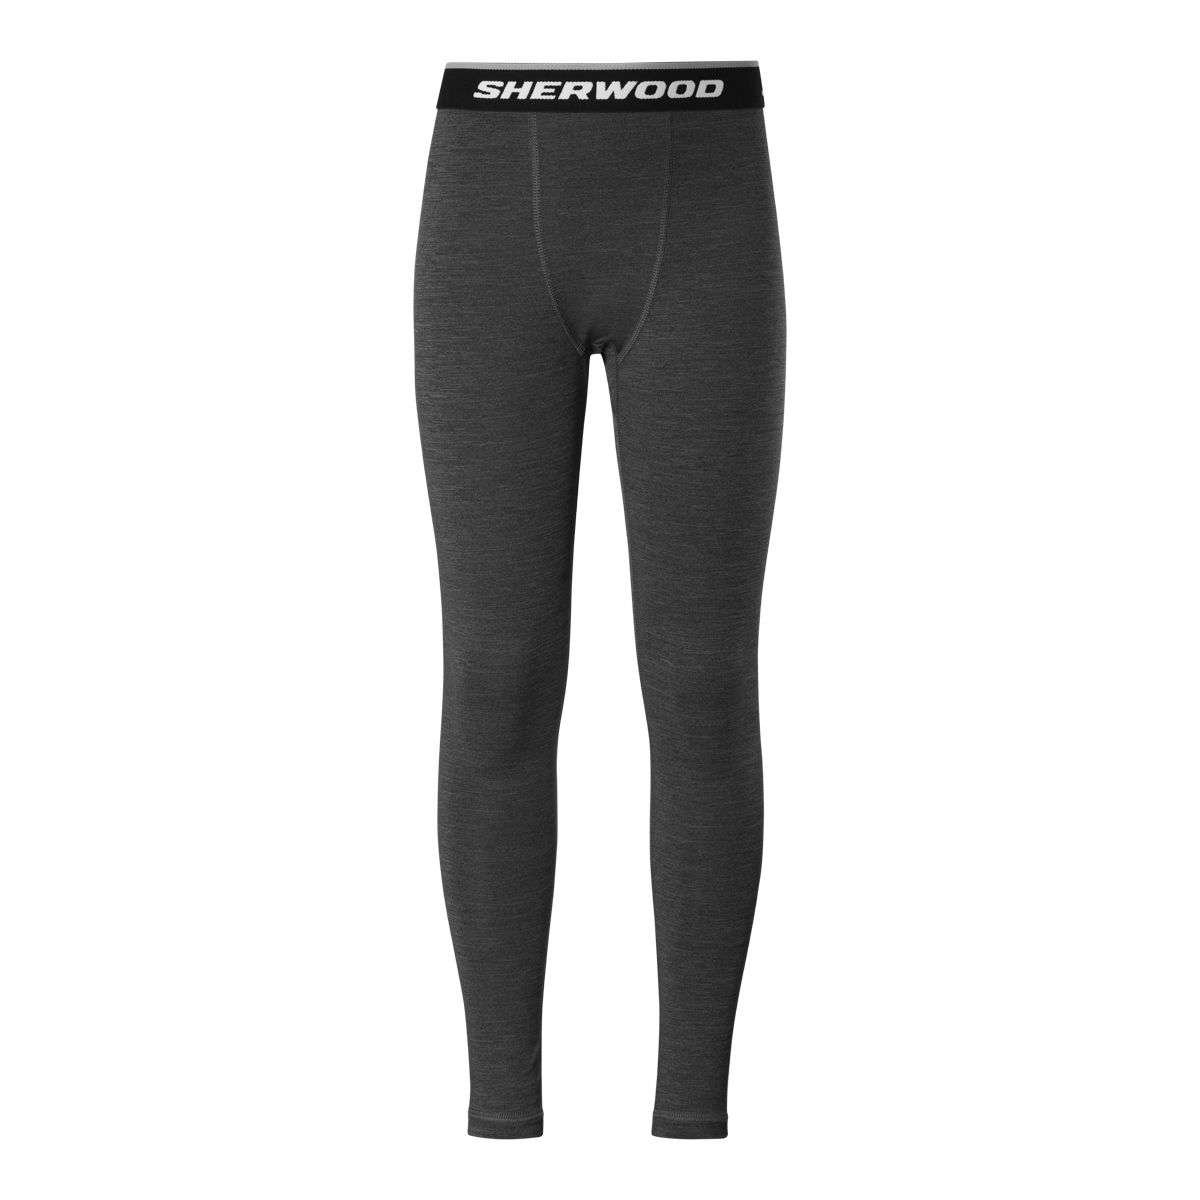  Youth Boys Compression Pants 3/4 Length Sports